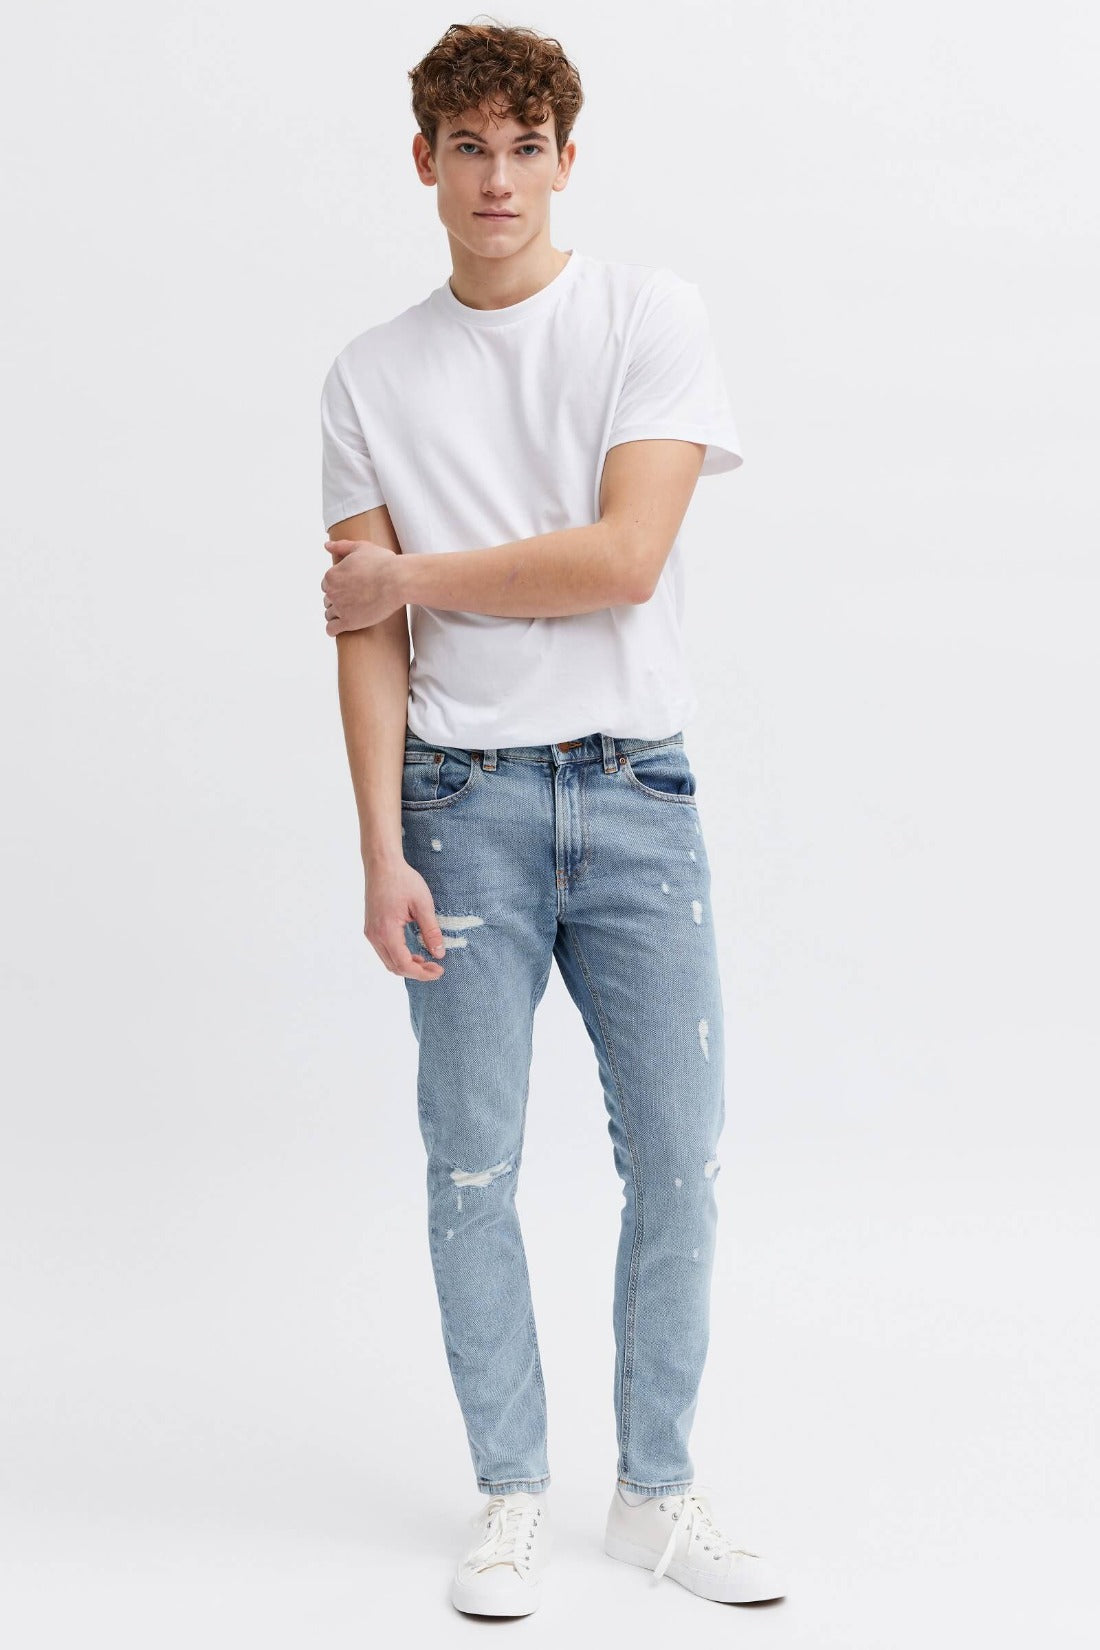 male ripped jeans, slim fit, ethical